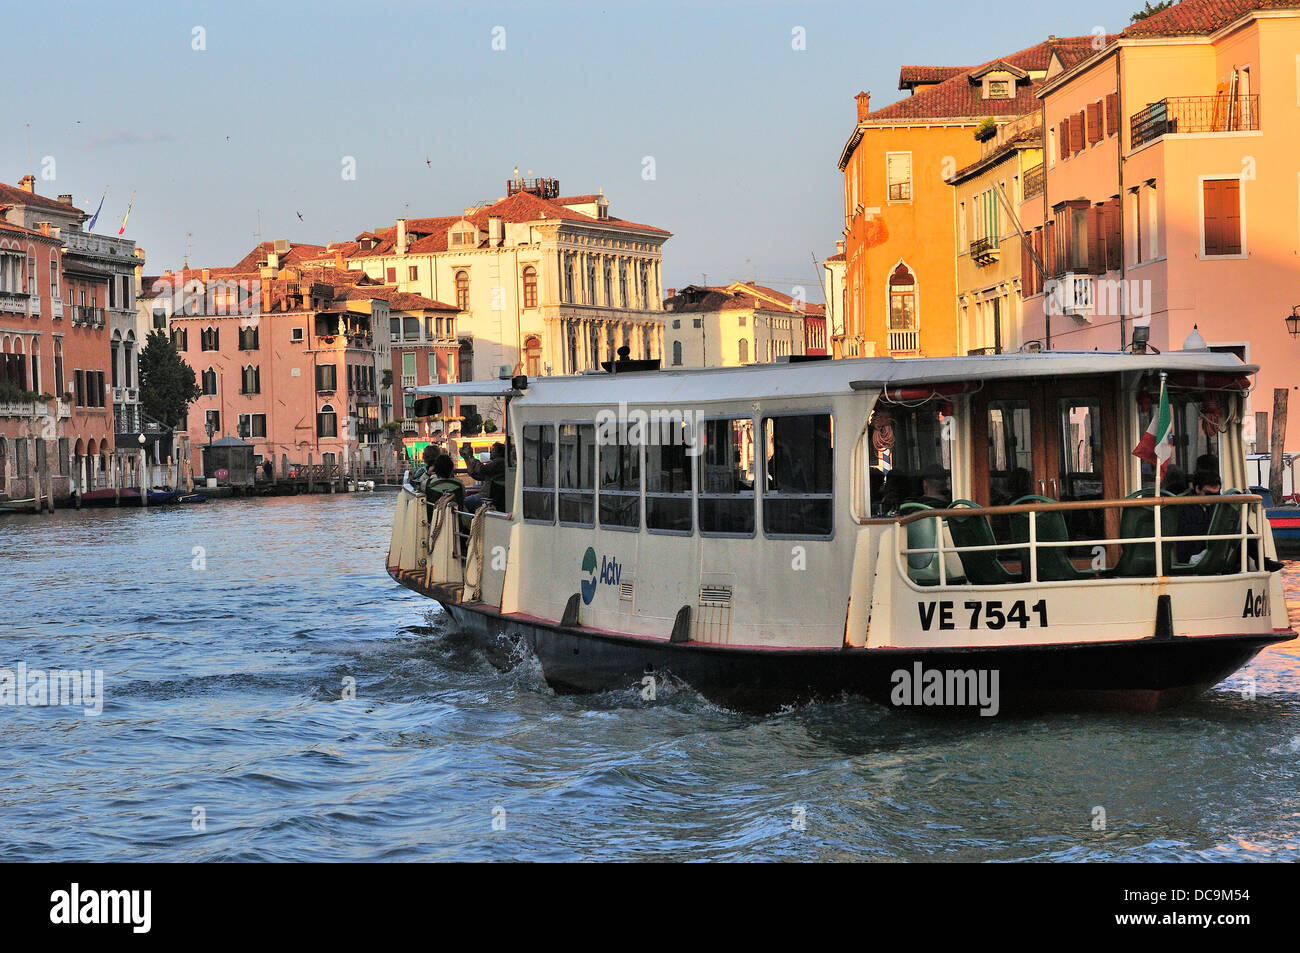 Vaporetto water bus on the Grand Canal in Venice, Italy